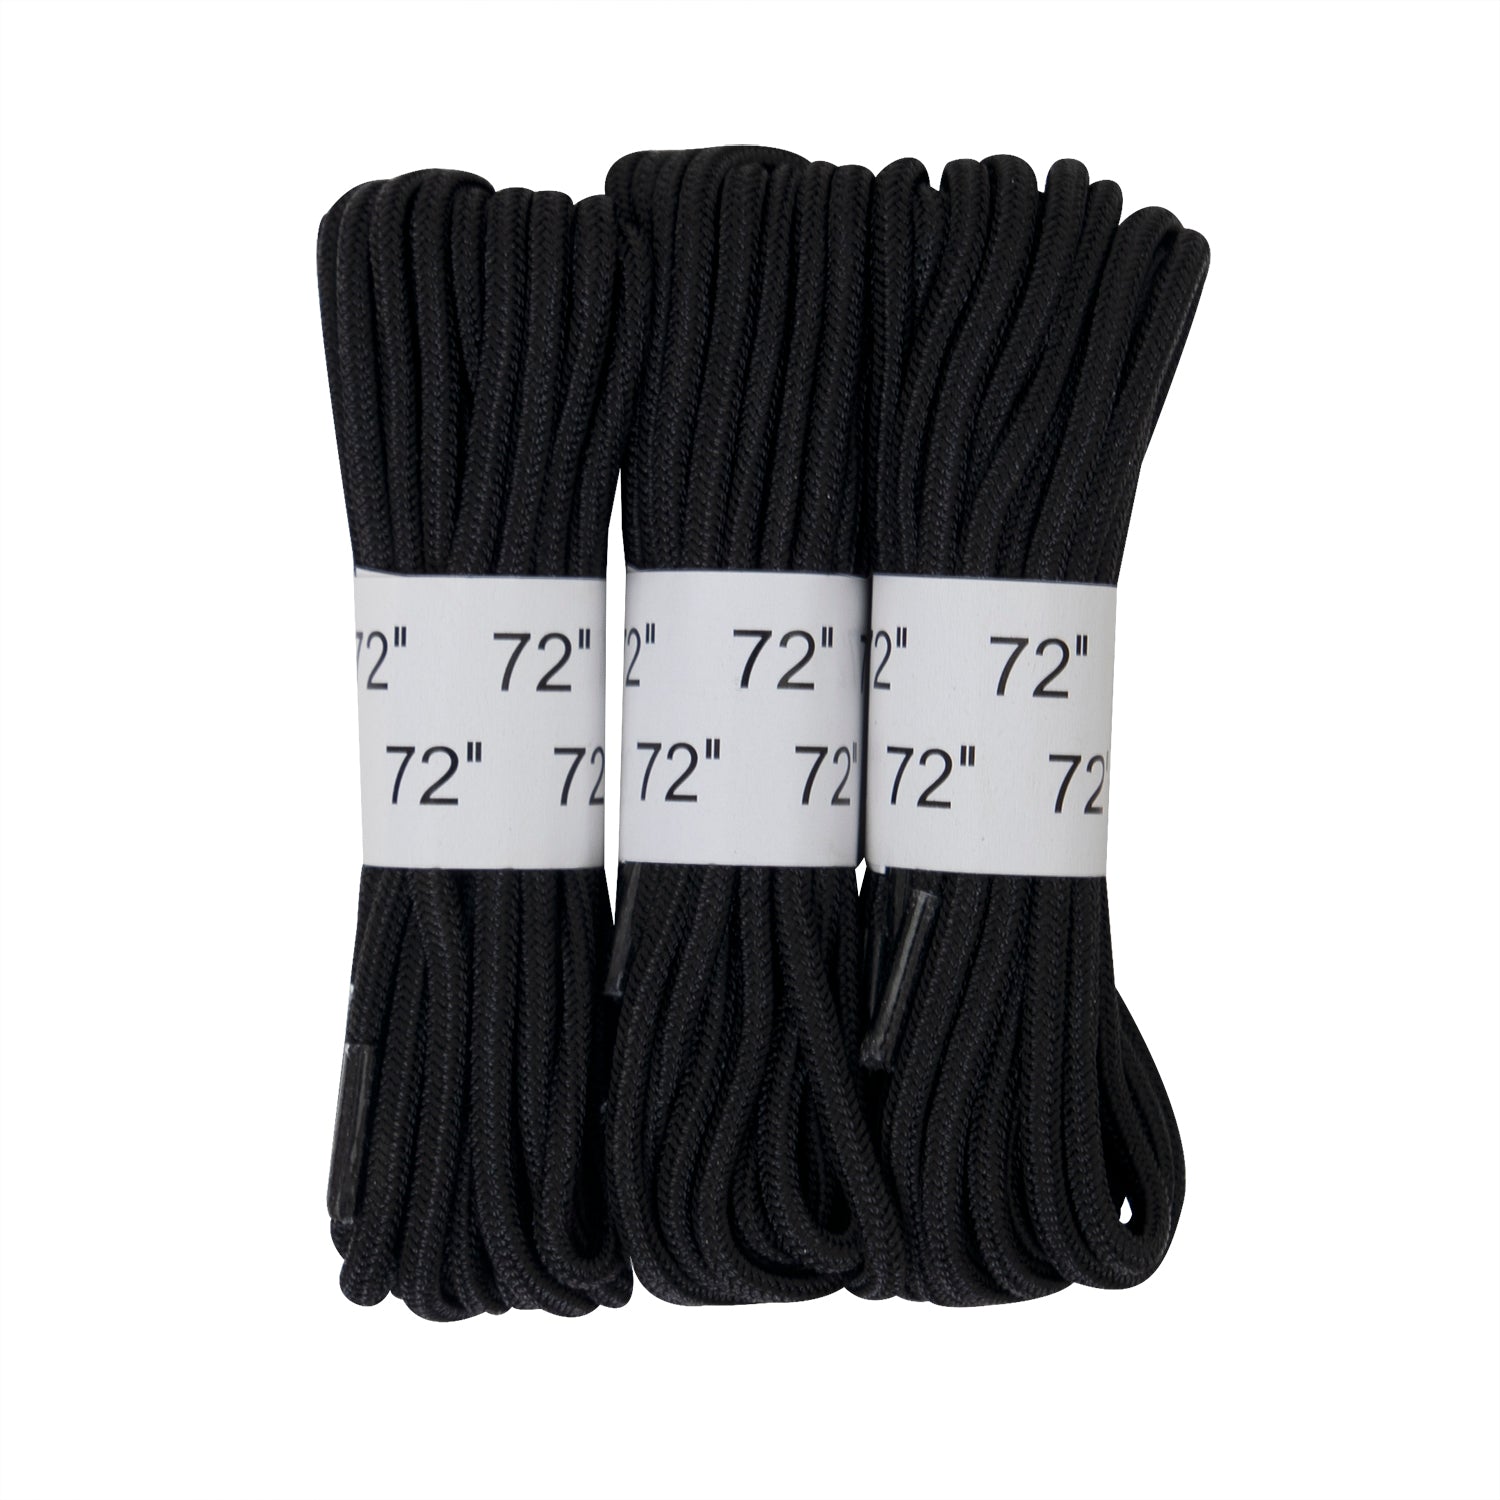 Rothco’s Boot Laces are perfect for military, tactical, and law enforcement personnel and come in a convenient three-pack.   Boot Laces Are Perfect Replacement Laces For Any Tactical Boot Constructed With Long-Lasting Polyamide (Black Laces Are Made Of Nylon) Heat Formed Tips Prevent Fraying 3 Pairs Of Shoes Laces Per Package 72 Inches In Length